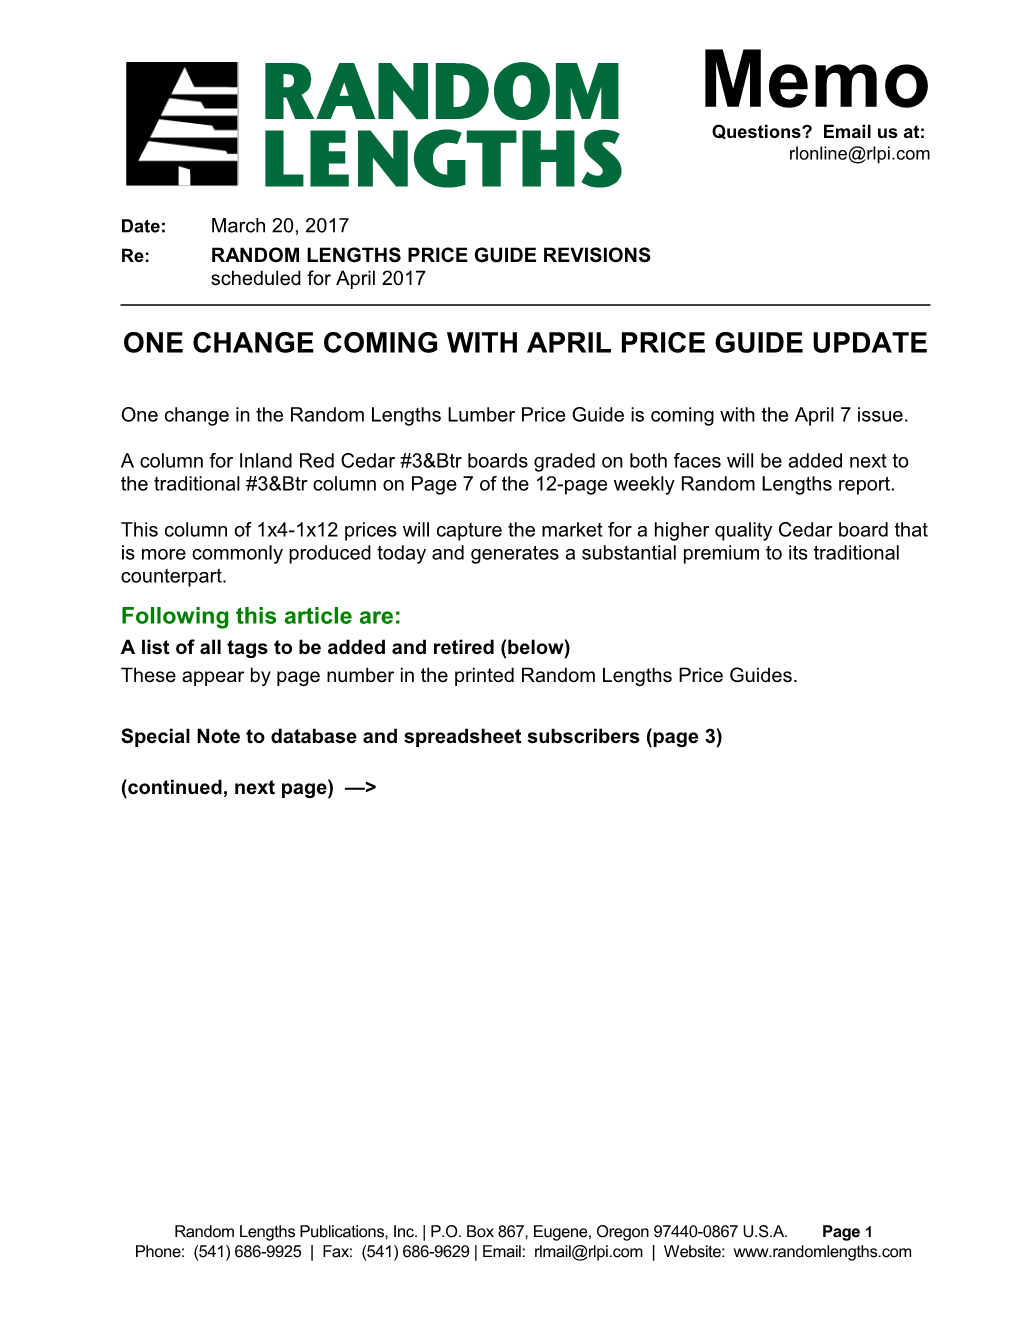 One Change Coming with April Price Guide Update